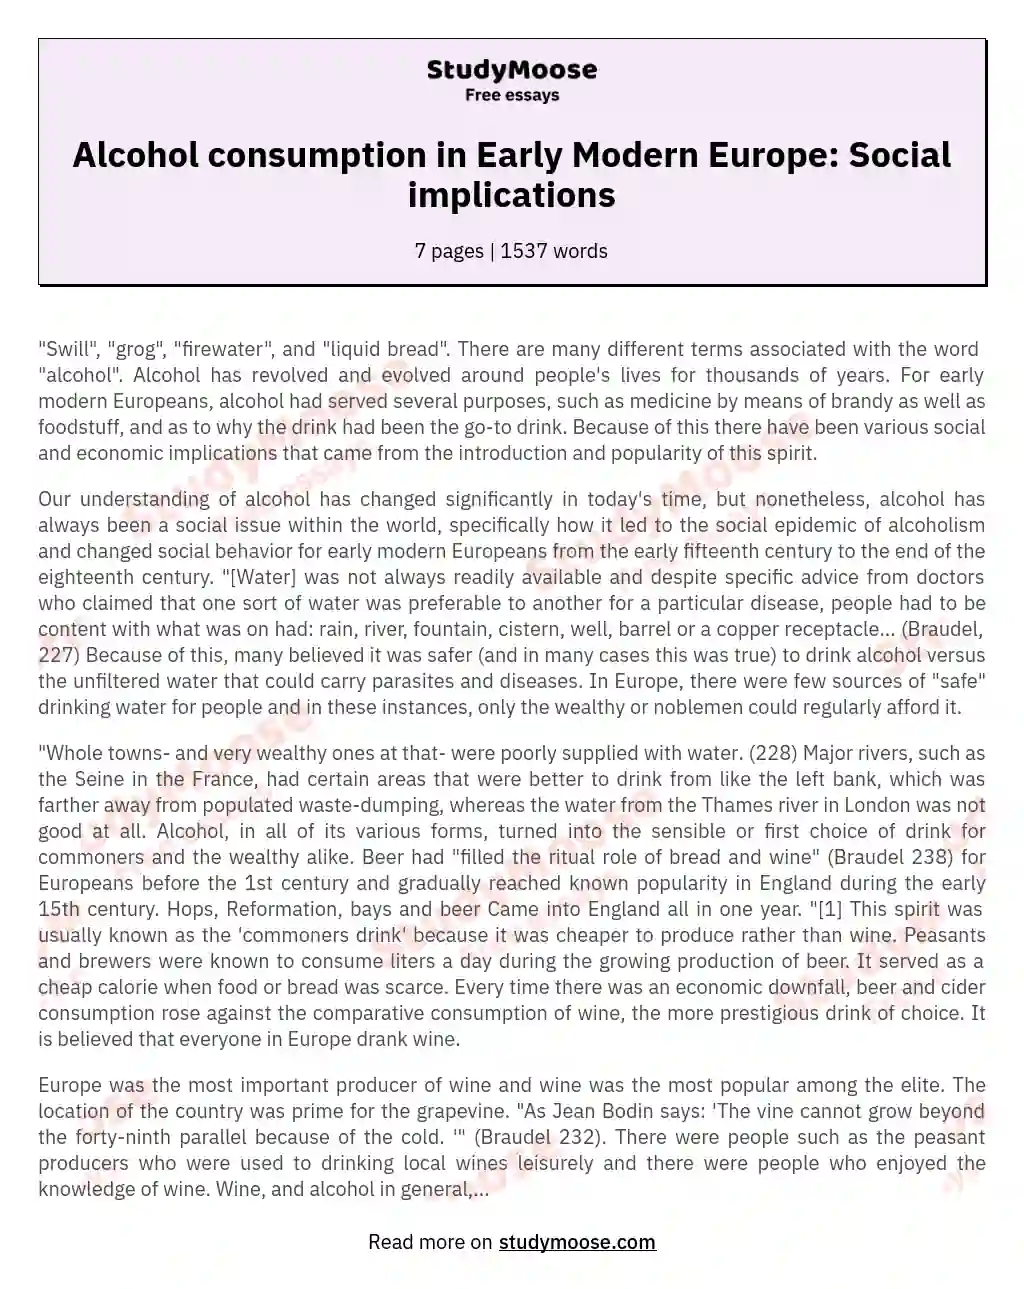 Alcohol consumption in Early Modern Europe: Social implications